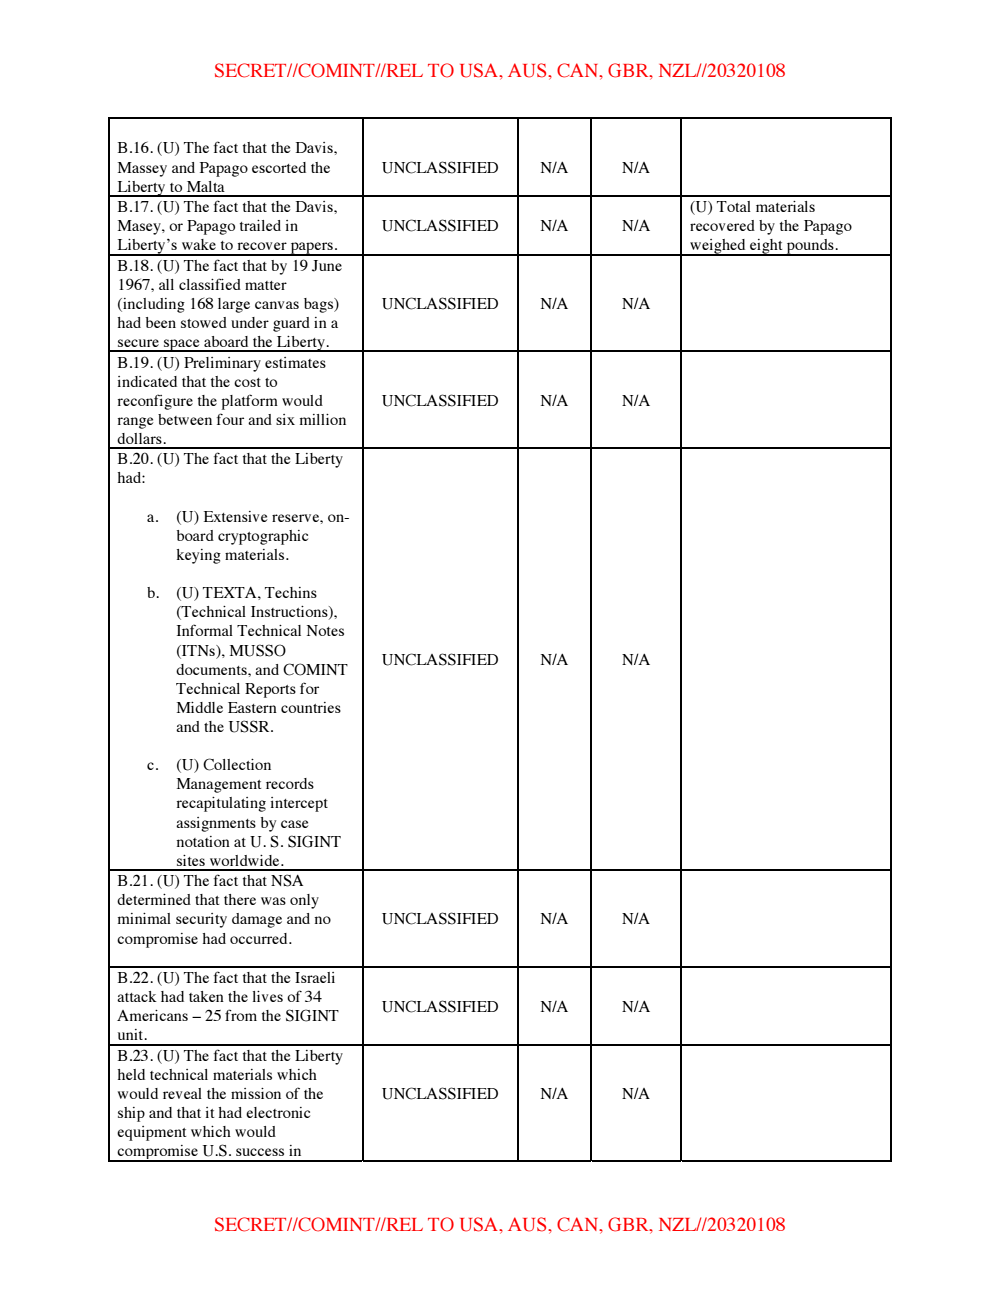 Page 6 from NSA’s USS Liberty Incident Classification Guide